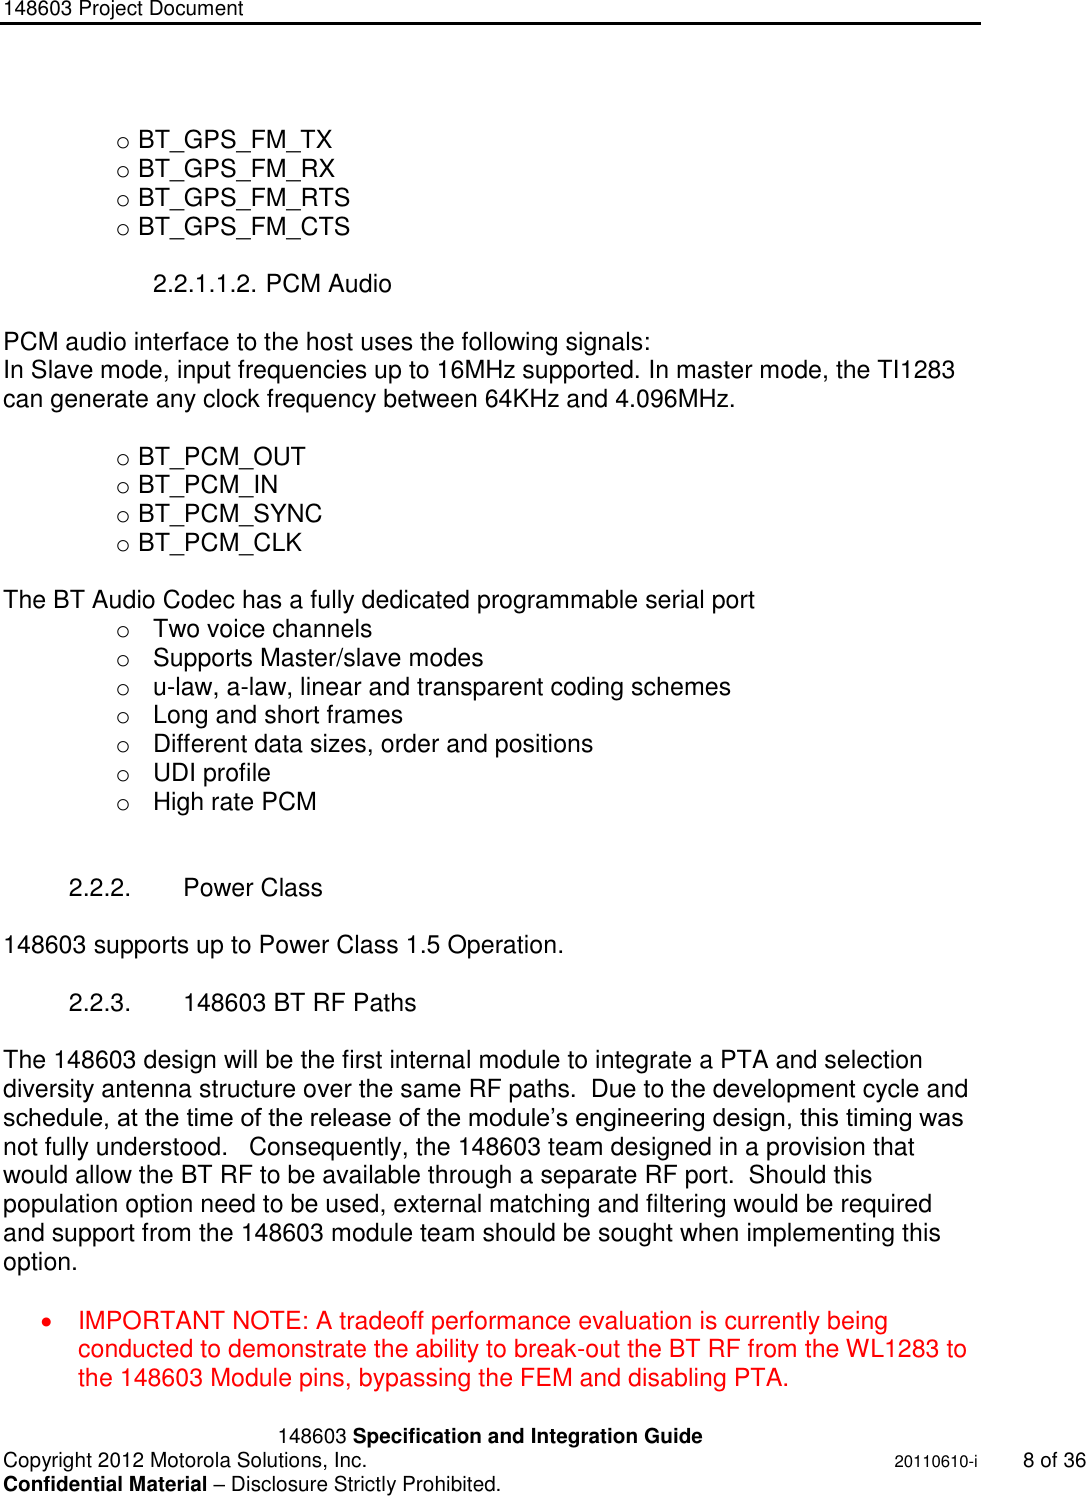 148603 Project Document       148603 Specification and Integration Guide  Copyright 2012 Motorola Solutions, Inc.    20110610-i  8 of 36 Confidential Material – Disclosure Strictly Prohibited. &quot;Ni ckel Leucochroic  Puffin&quot;  o BT_GPS_FM_TX o BT_GPS_FM_RX o BT_GPS_FM_RTS o BT_GPS_FM_CTS   2.2.1.1.2. PCM Audio  PCM audio interface to the host uses the following signals: In Slave mode, input frequencies up to 16MHz supported. In master mode, the TI1283 can generate any clock frequency between 64KHz and 4.096MHz.  o BT_PCM_OUT o BT_PCM_IN o BT_PCM_SYNC o BT_PCM_CLK  The BT Audio Codec has a fully dedicated programmable serial port o  Two voice channels o  Supports Master/slave modes o  u-law, a-law, linear and transparent coding schemes o  Long and short frames o  Different data sizes, order and positions o  UDI profile o  High rate PCM    2.2.2.  Power Class  148603 supports up to Power Class 1.5 Operation.    2.2.3.  148603 BT RF Paths  The 148603 design will be the first internal module to integrate a PTA and selection diversity antenna structure over the same RF paths.  Due to the development cycle and schedule, at the time of the release of the module‟s engineering design, this timing was not fully understood.   Consequently, the 148603 team designed in a provision that would allow the BT RF to be available through a separate RF port.  Should this population option need to be used, external matching and filtering would be required and support from the 148603 module team should be sought when implementing this option.      IMPORTANT NOTE: A tradeoff performance evaluation is currently being conducted to demonstrate the ability to break-out the BT RF from the WL1283 to the 148603 Module pins, bypassing the FEM and disabling PTA. 